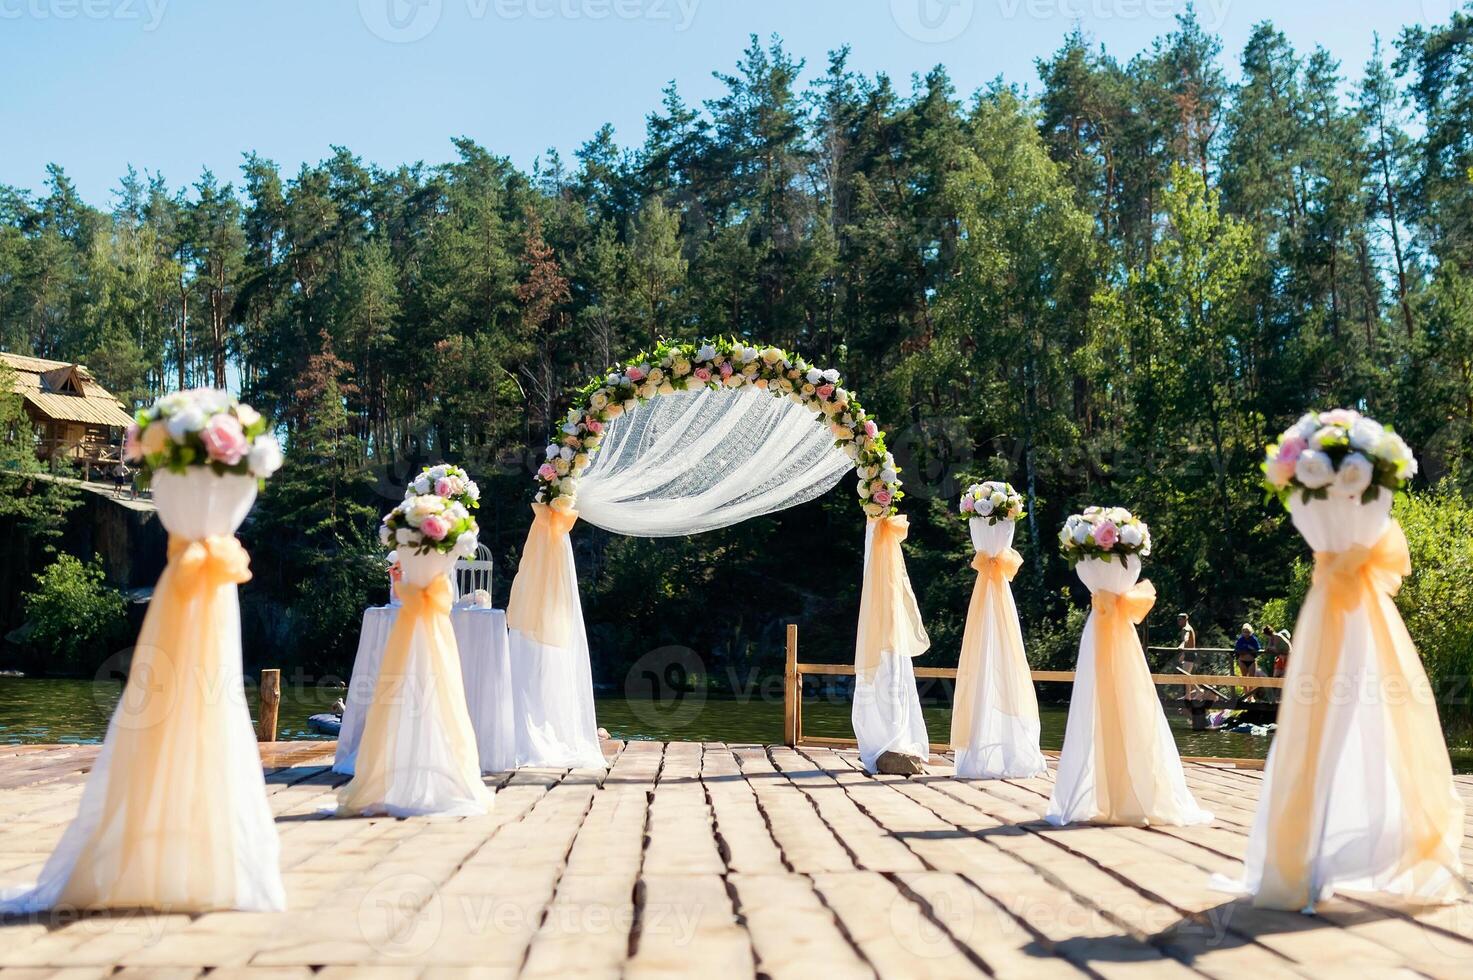 Beautiful place for wedding ceremony on the wooden bridge over the river. Archway decorated with creamy and white cloth and flowers on the natural forest background in summer. photo